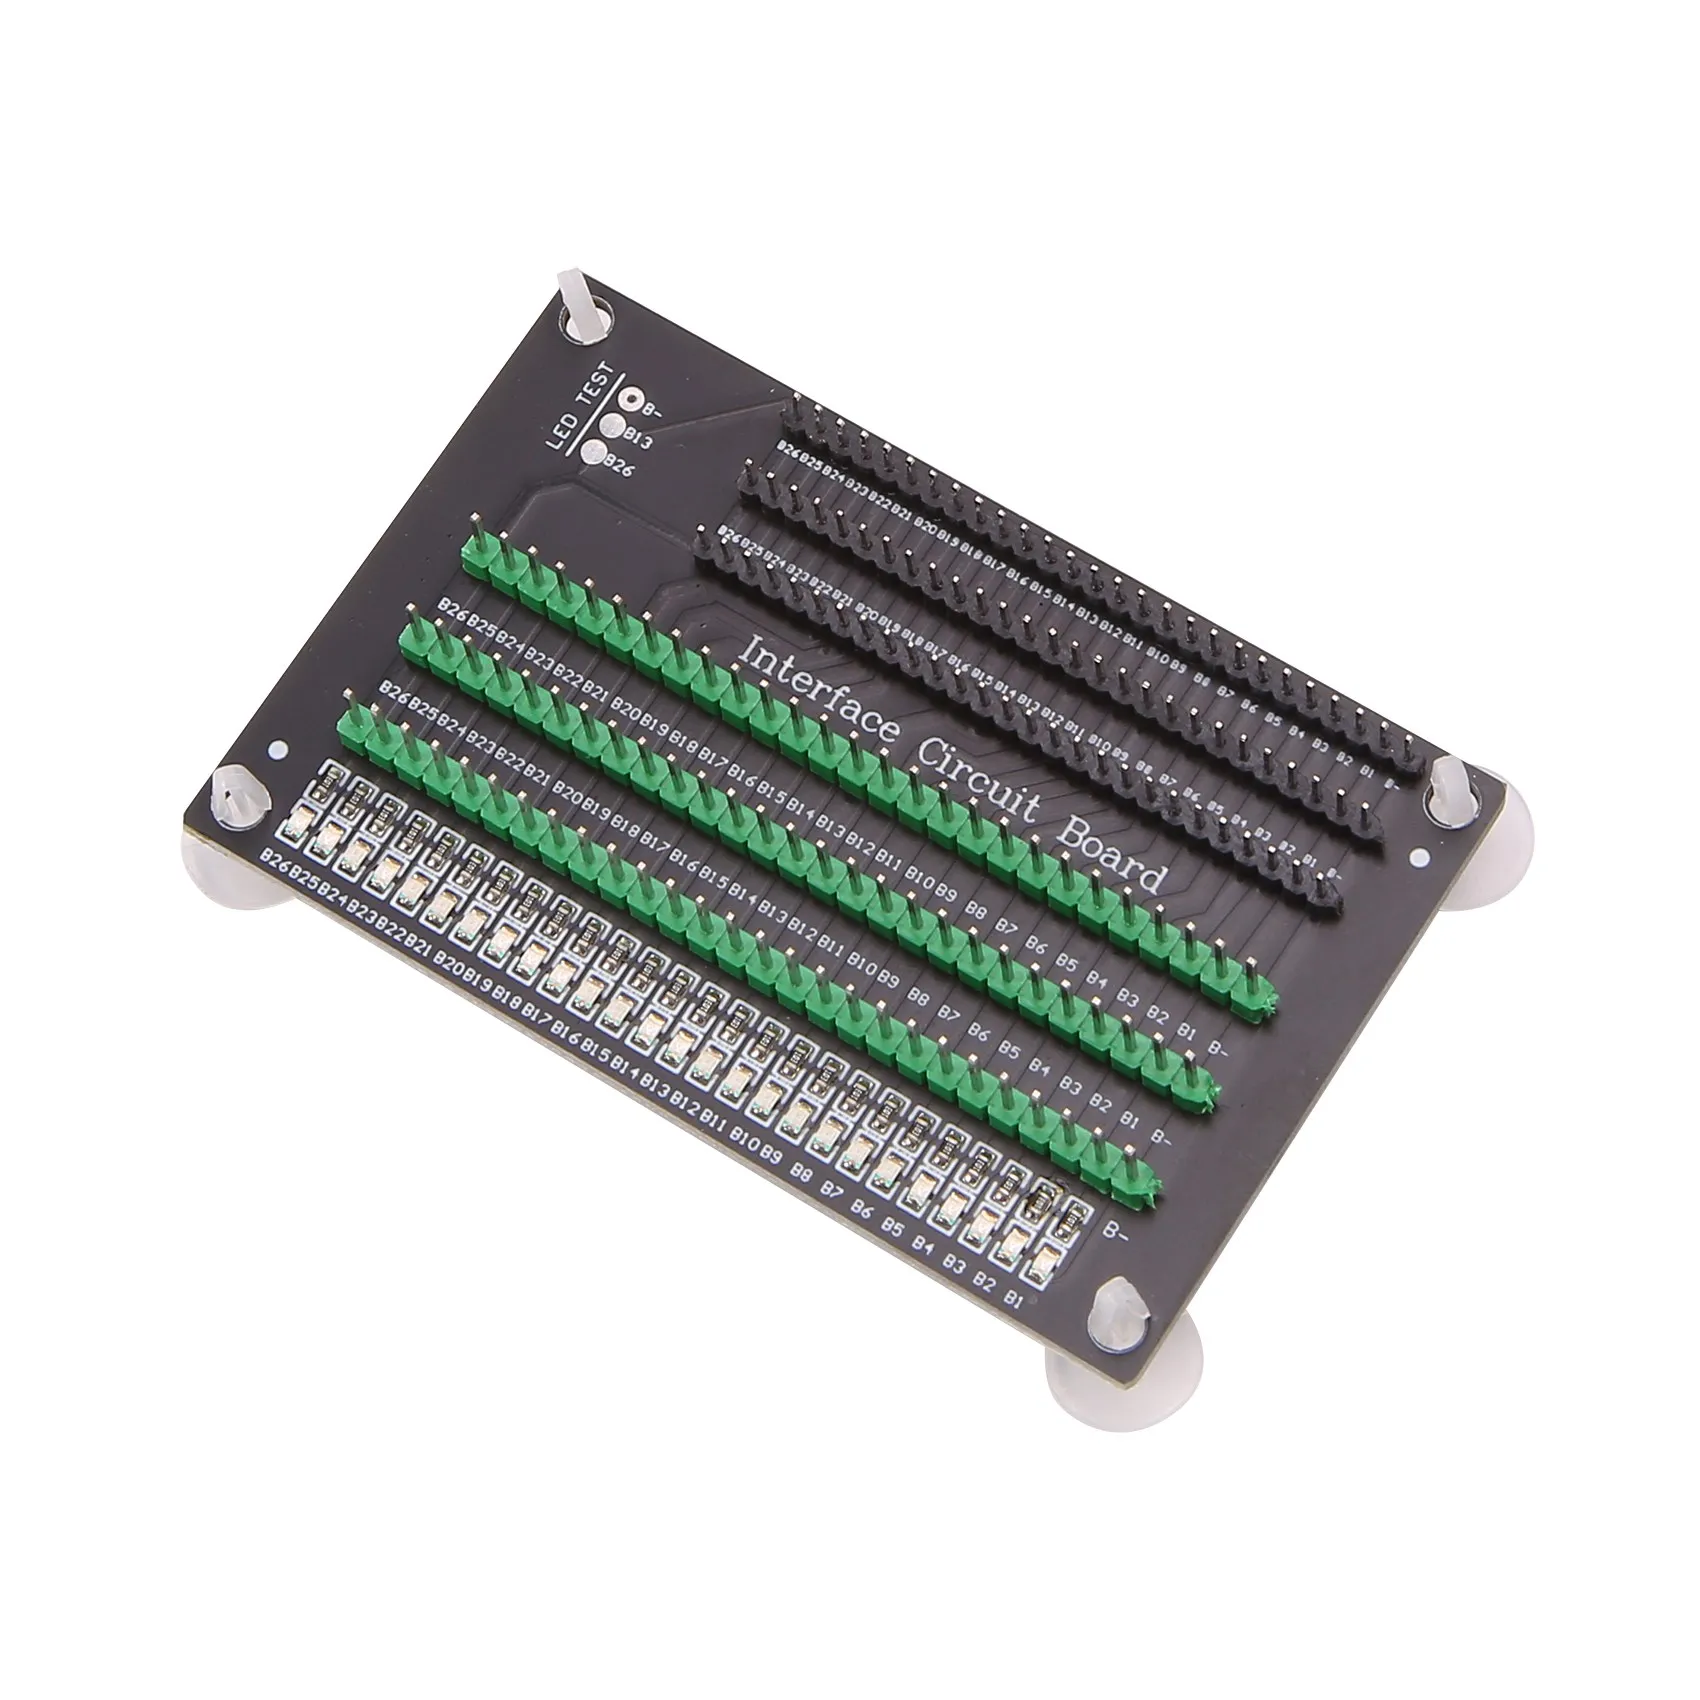 

2S-3S-4S-13S-26S Lipo High Current Active Equalizer Adapter Board Battery Protection 2-2.54 Line Board